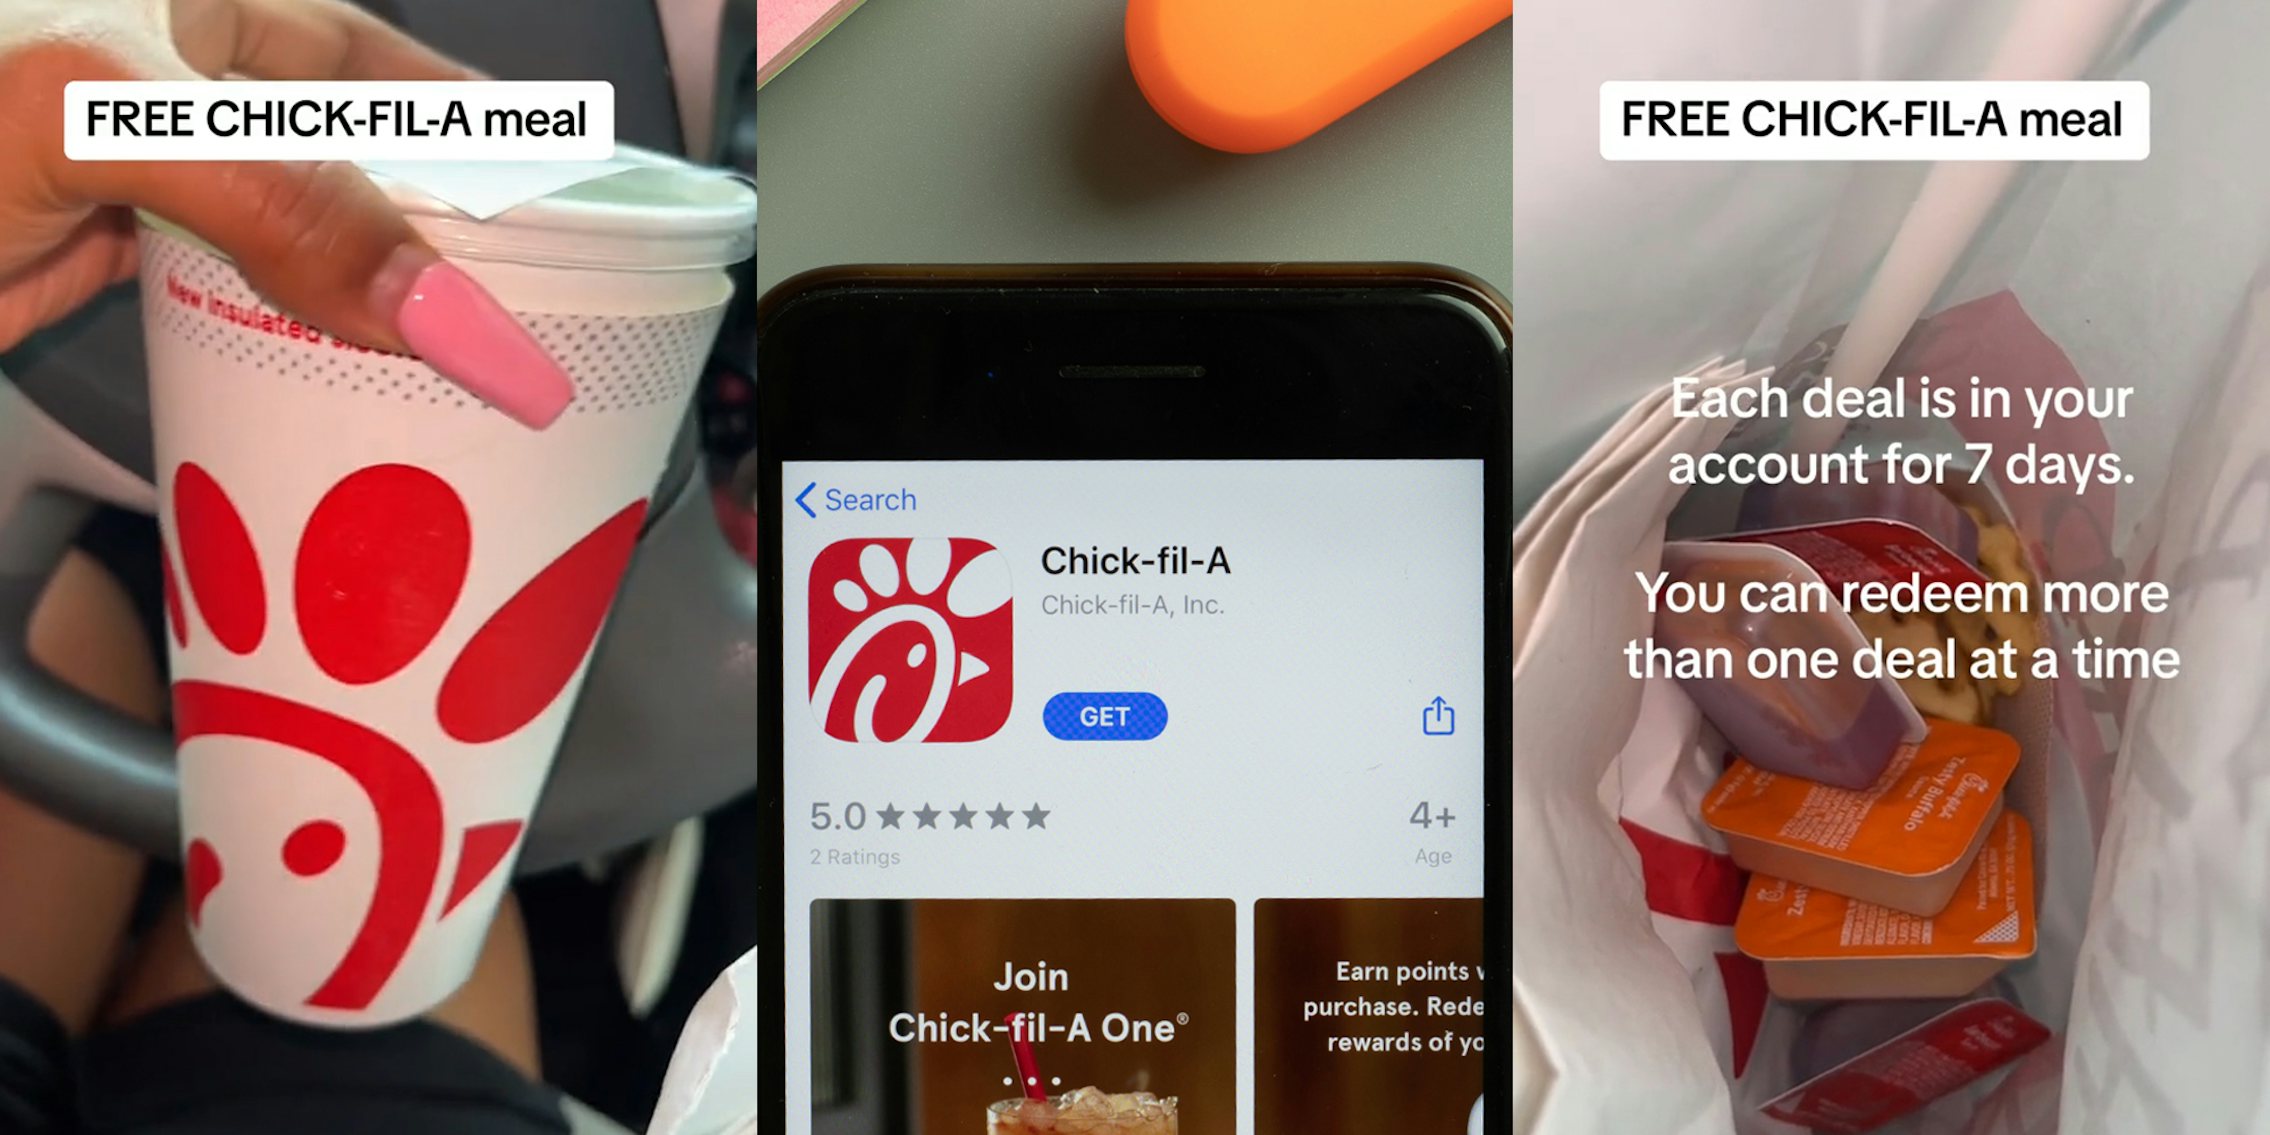 Chick-fil-A customer holding drink in car with caption 'FREE CHICK-FIL-A meal' (l) Chick-fil-A app in Appstore on phone screen in front of green background (c) Chick-fil-A food in bag in car with caption 'FREE CHICK-FIL-A meal' 'Each deal is in your account for 7 days. You can redeem more than one deal at a time' (r)